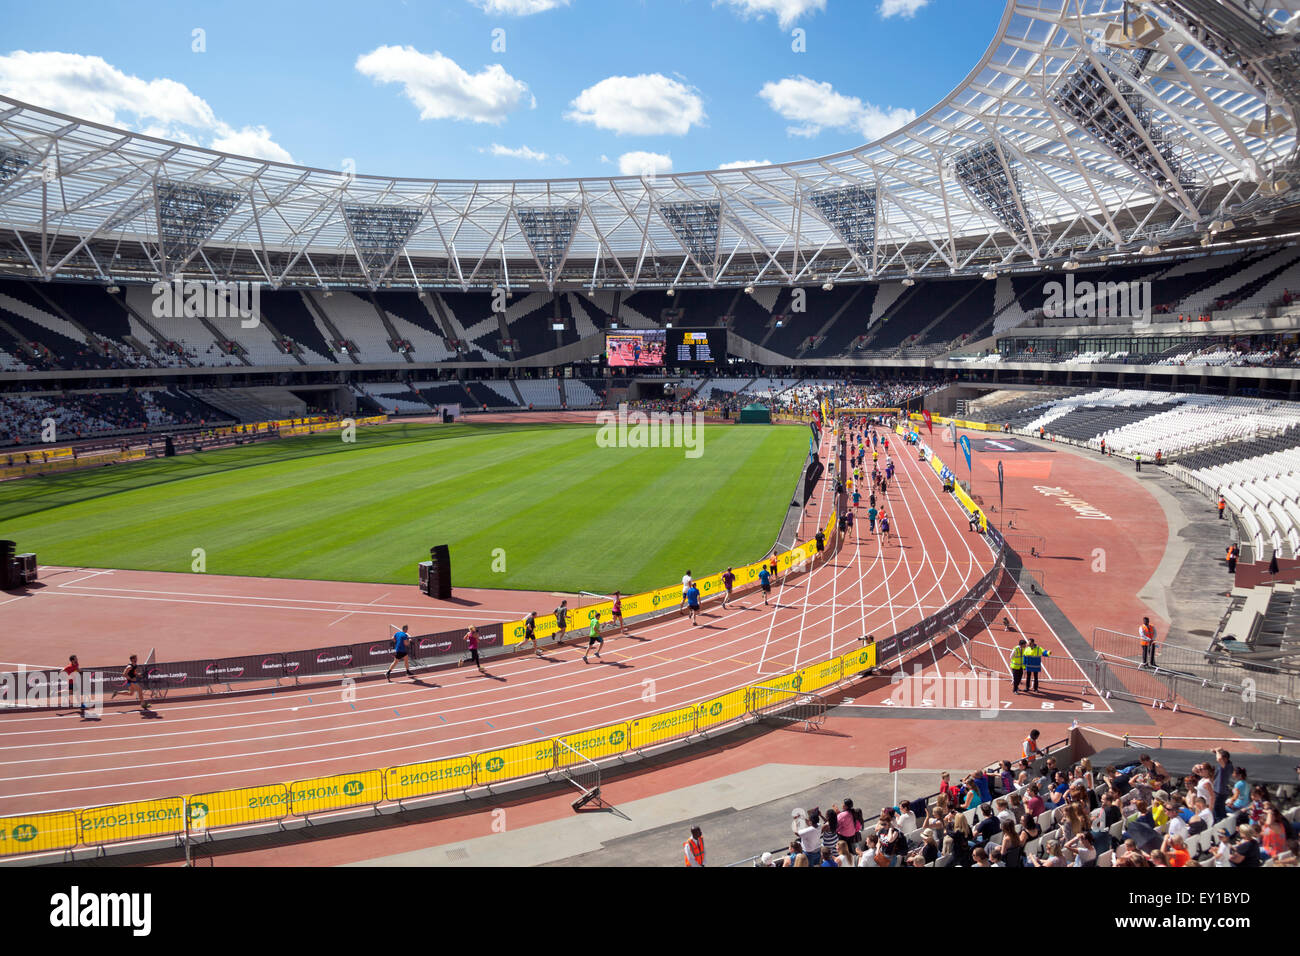 London, UK. 19th July, 2015. Thousands of runners participate in the 10k Great Newham London Run in Queen Elizabeth Olympic Park. All participants got the chance to finish their run inside the Stadium, with a big audience cheering their arrival. The run is the first event to take place in the former Olympic Stadium since transformation work began. Credit: Nathaniel Noir/Alamy Live News Stock Photo